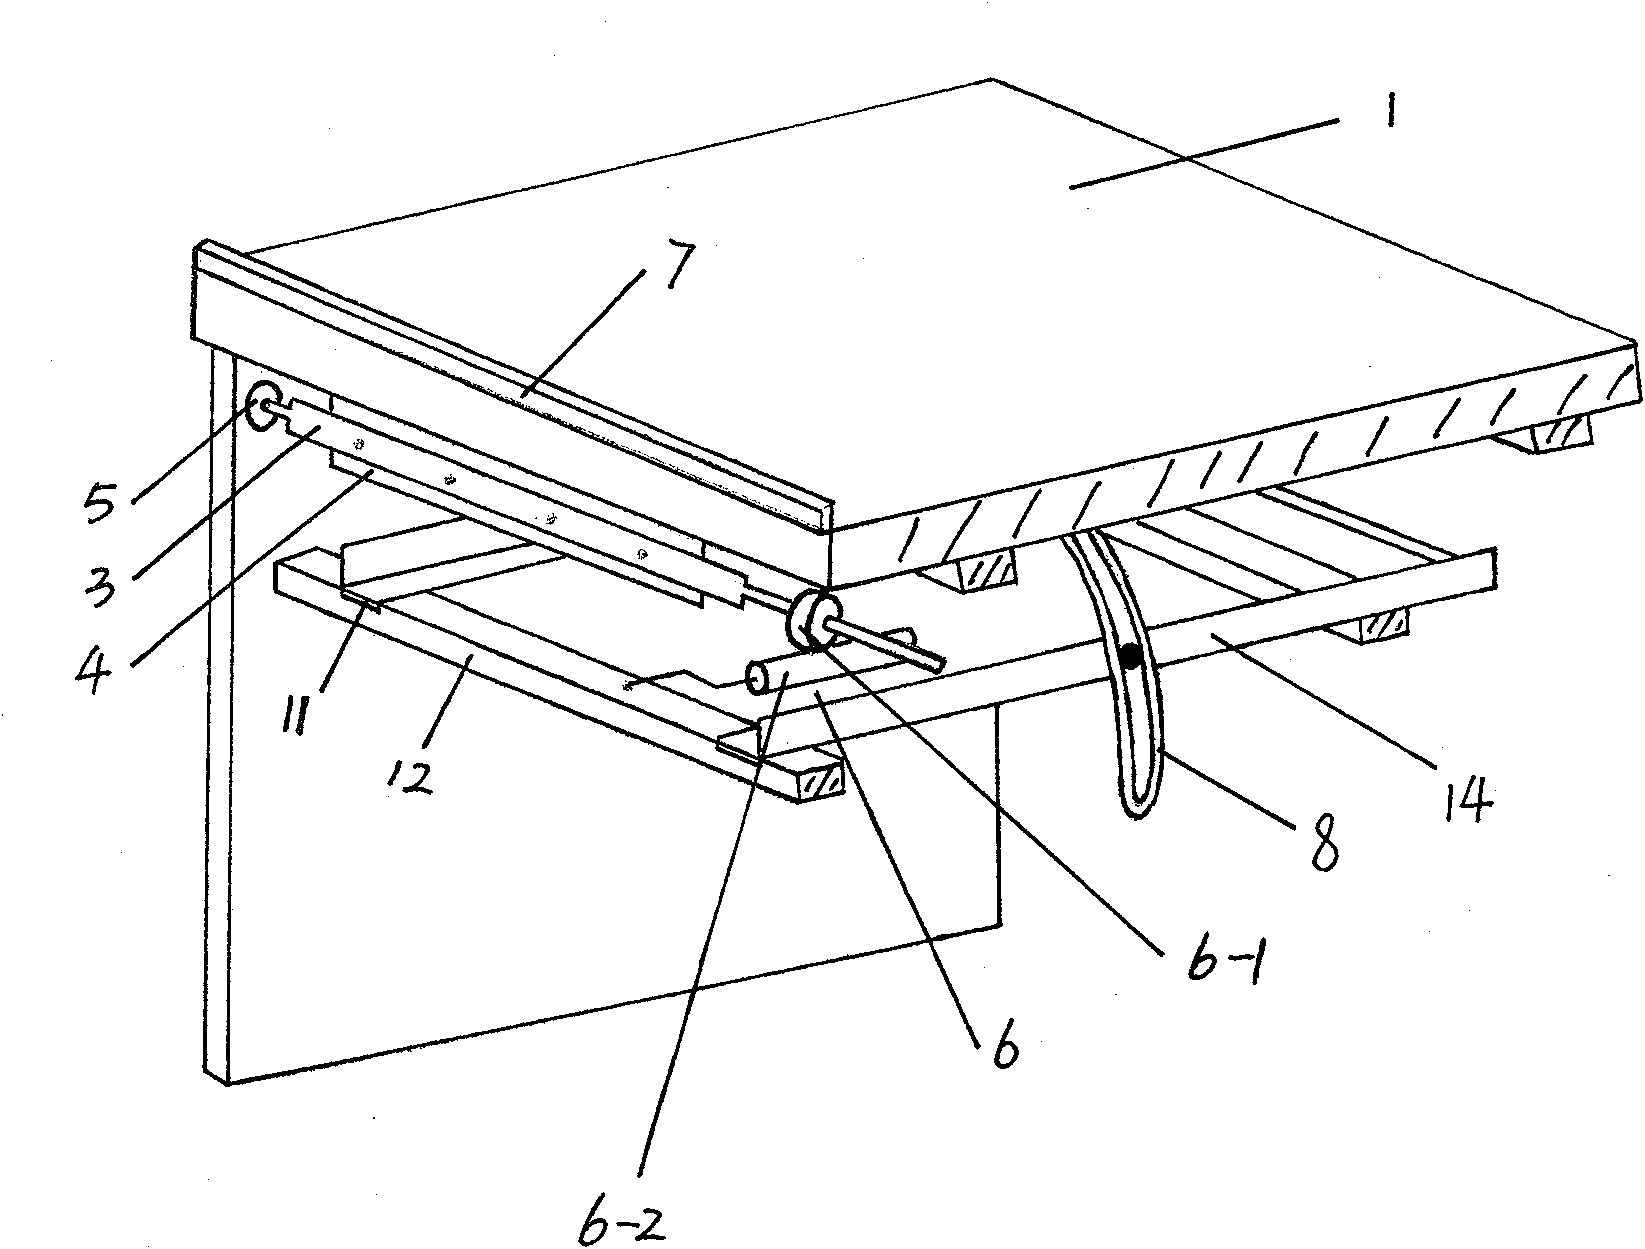 Computer desk with forerake accommodative table-board for storing display